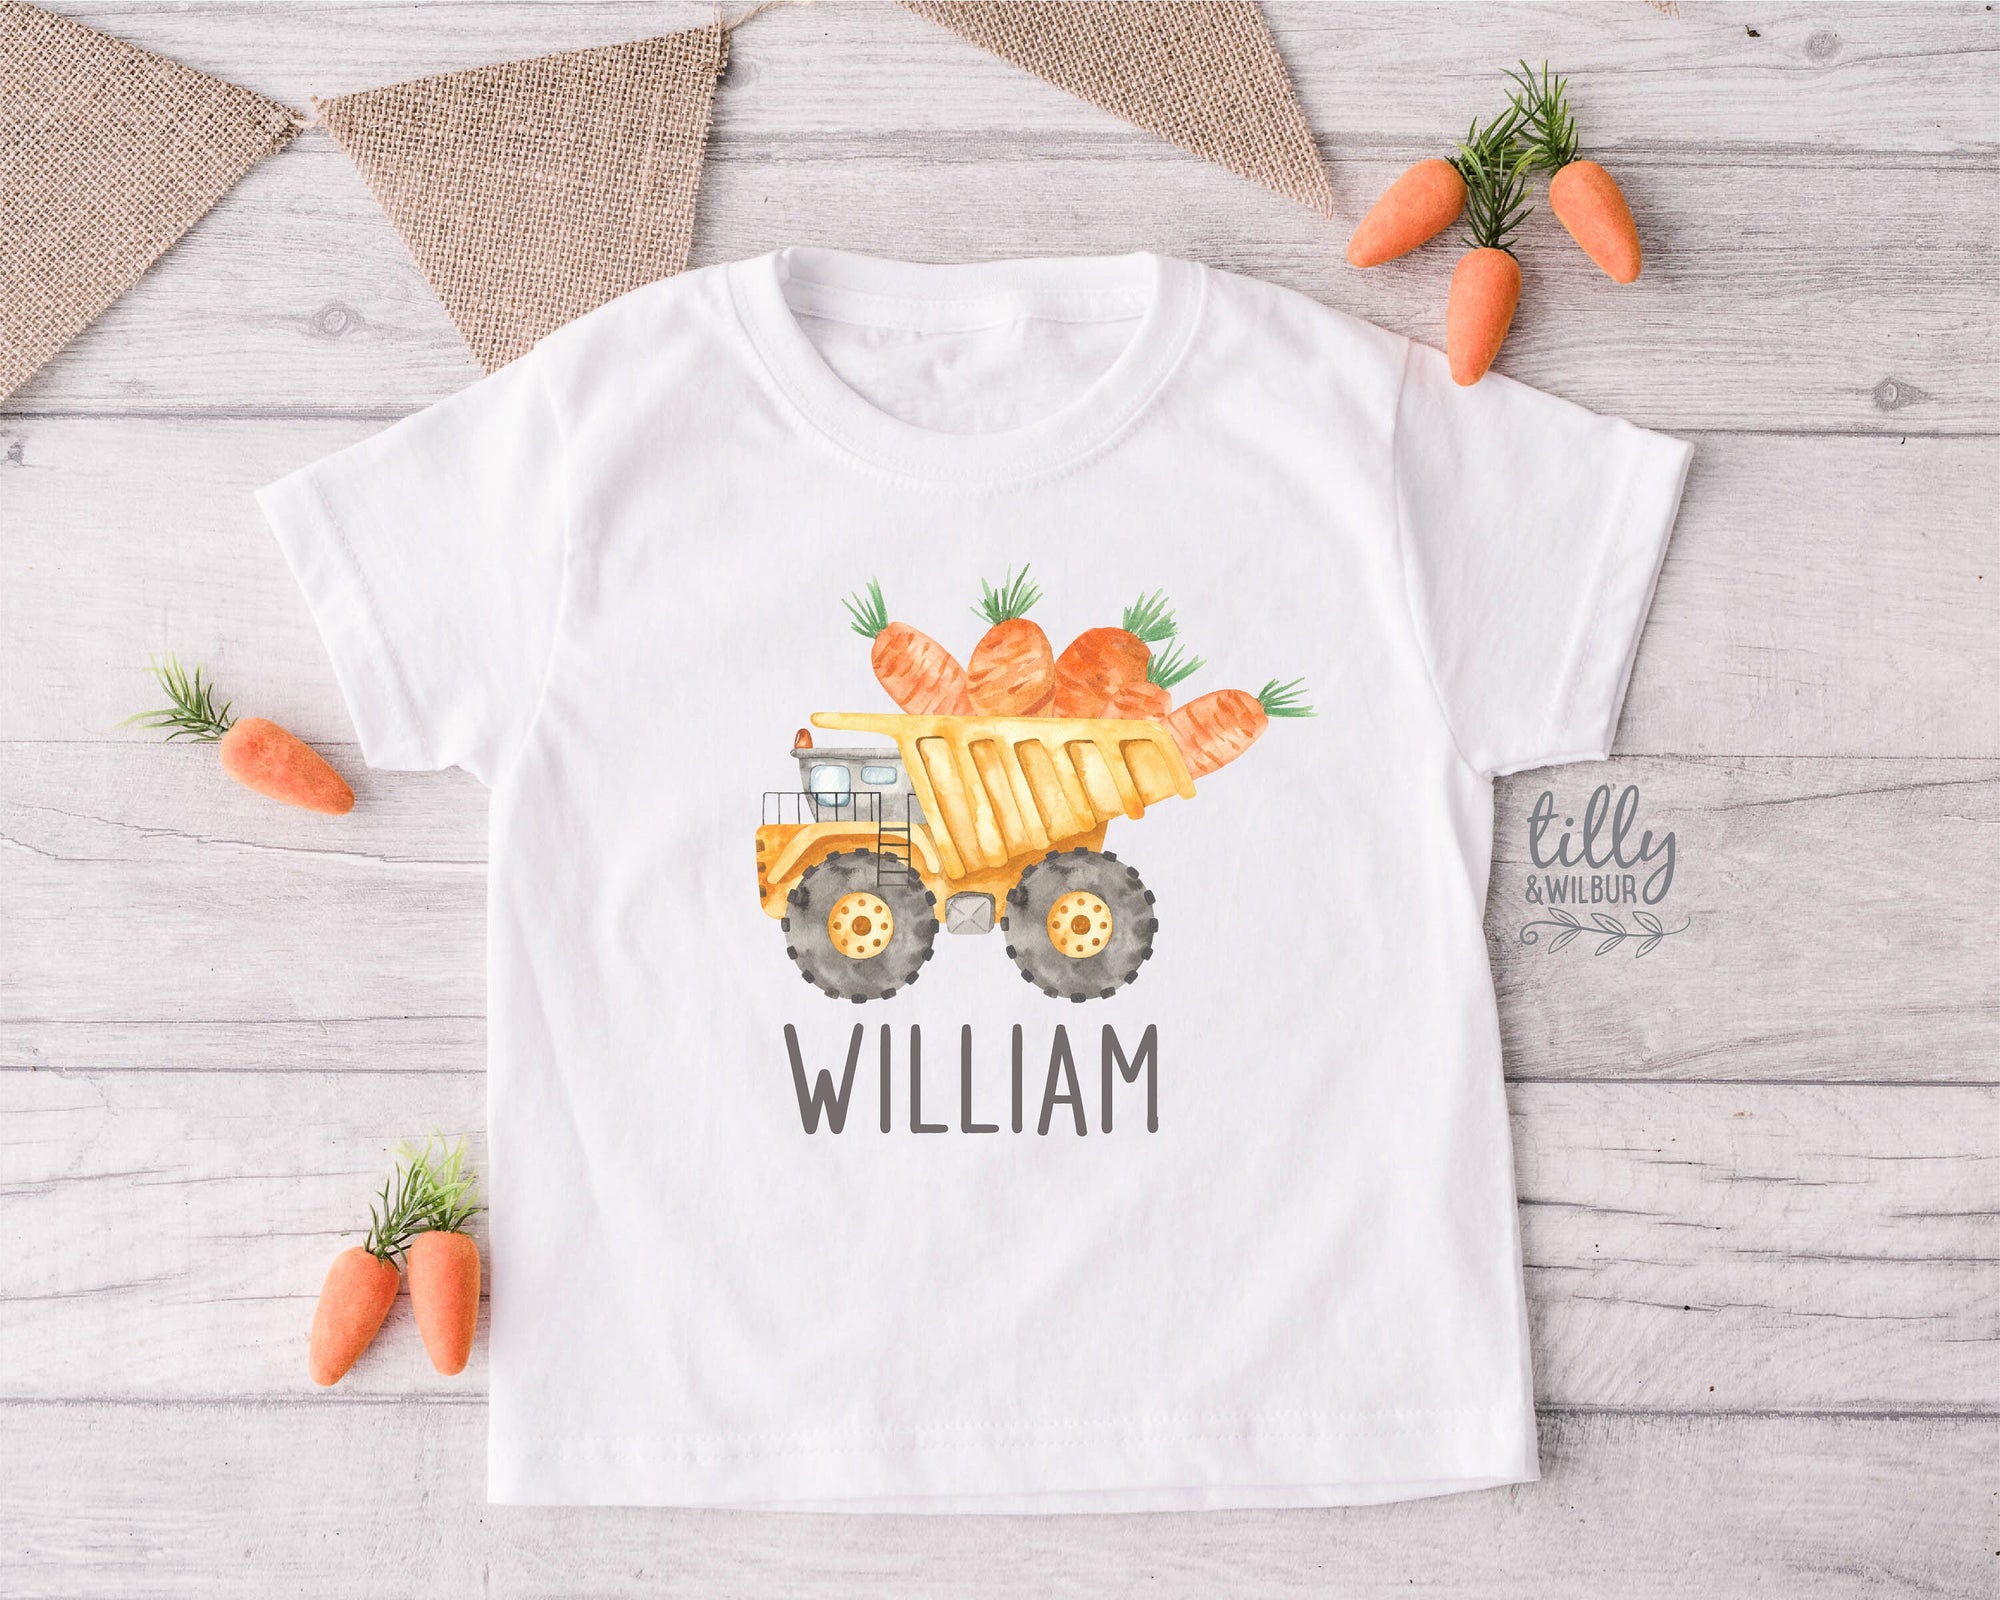 Easter T-Shirt With Name, Personalised Easter T-Shirt, Construction, Easter Dump Truck, Dump Truck With Carrots, Watercolor Easter Design